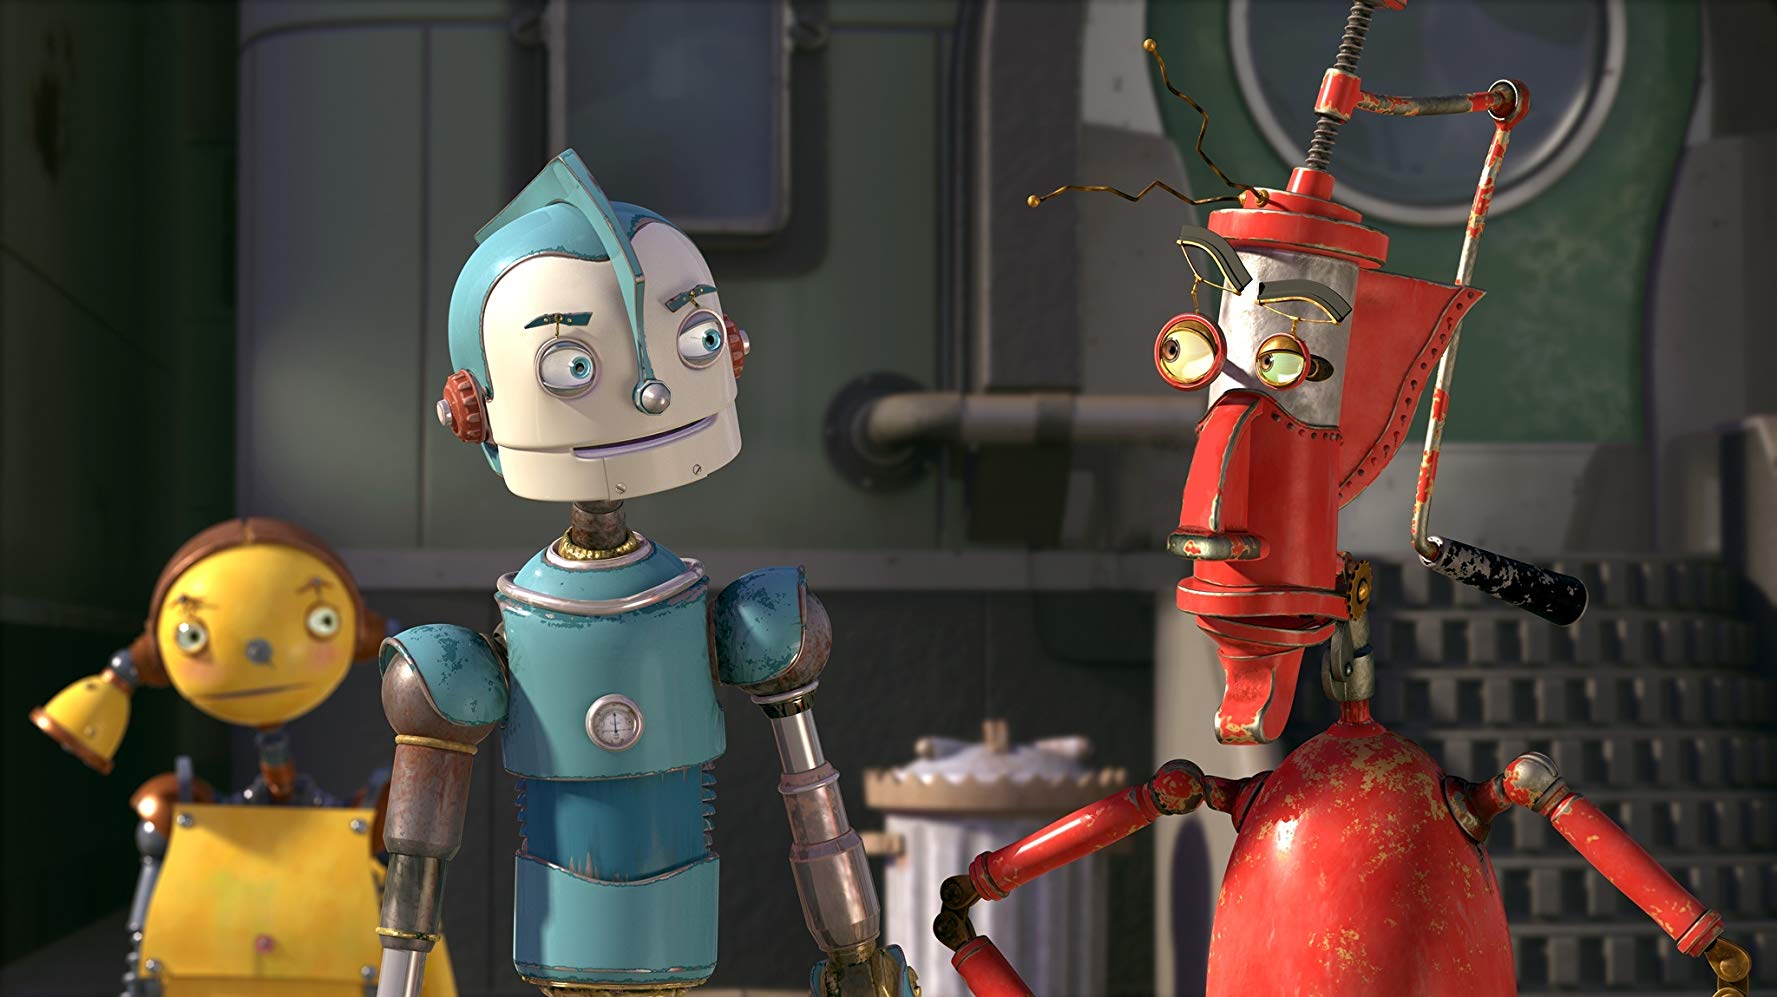 (l to r) Piper (voiced by Amanda Bynes), Rodney Copperbottom (voiced by Ewan McGregor) and Fender (voiced by Robin Williams) in Robots (2005)